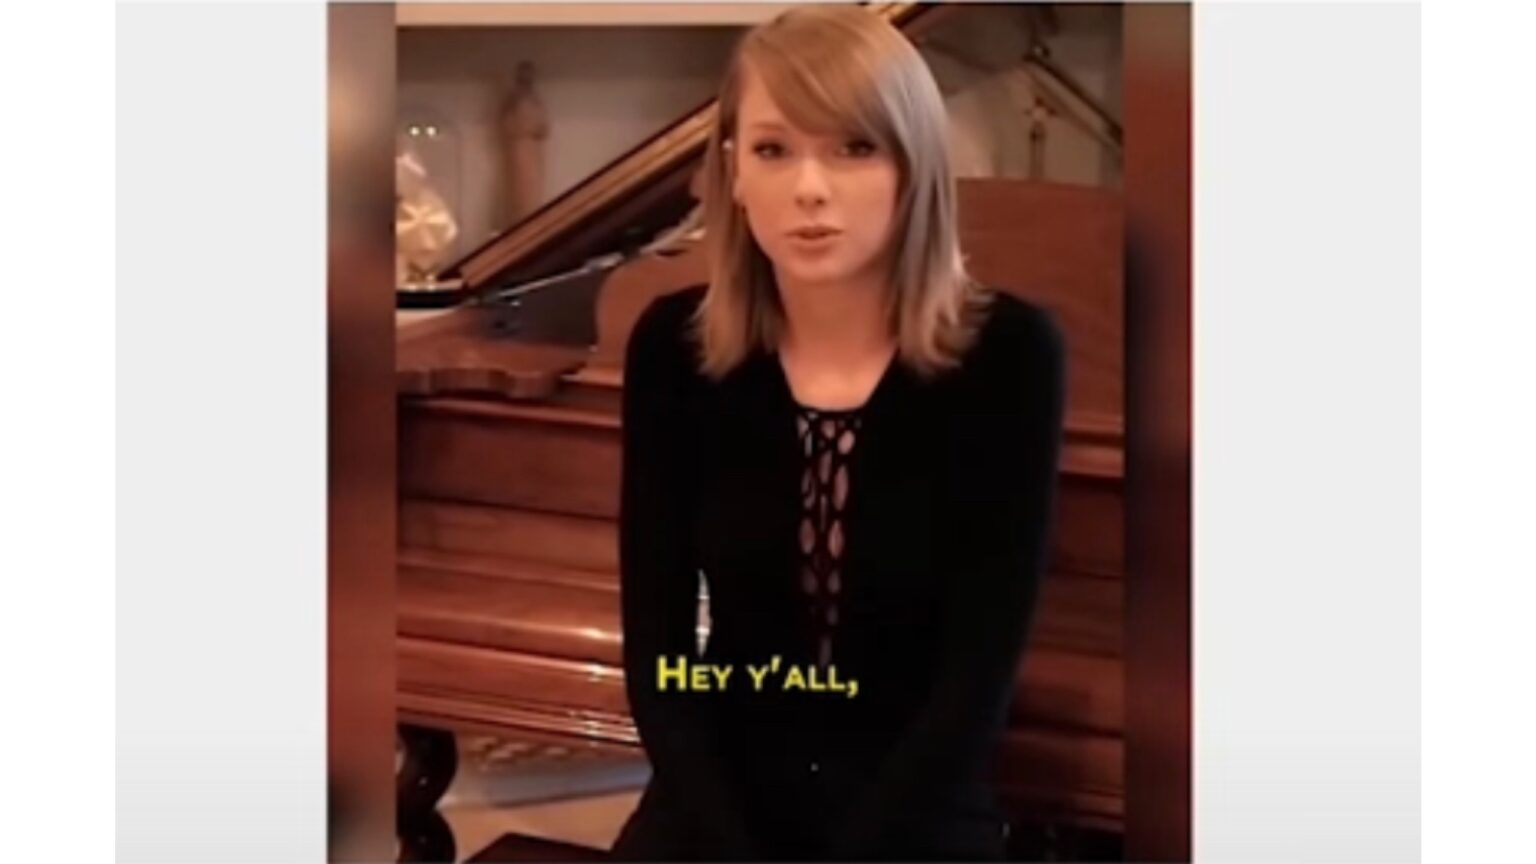 Taylor Swift Deepfaked in an AI Cookware Ad